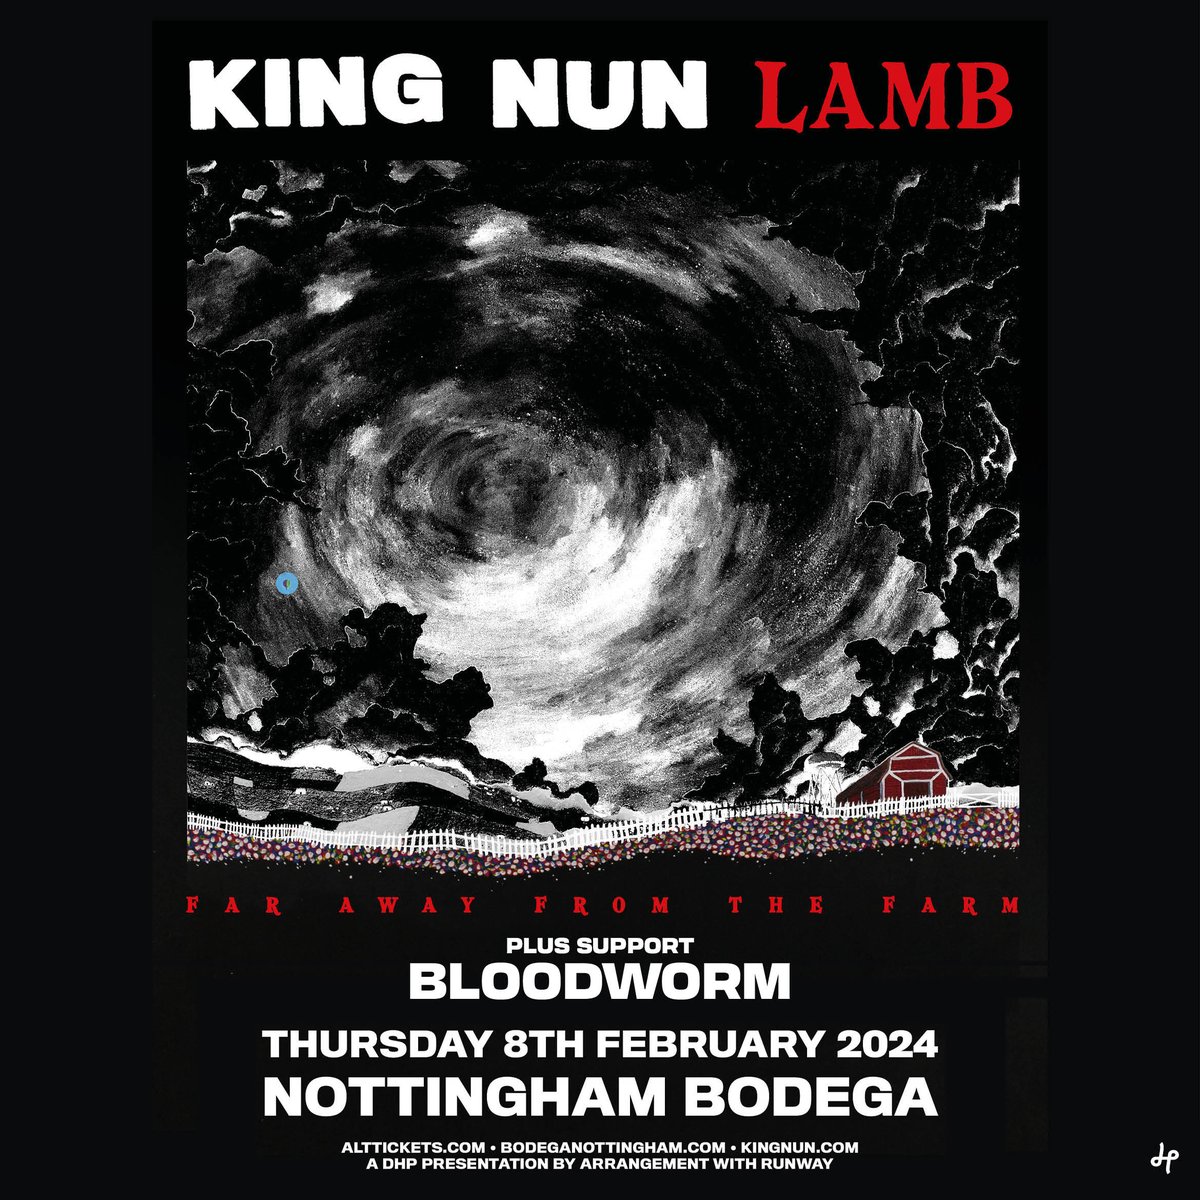 SUPPORT/ @bloodworm_band will be joining @king_nun at their @bodeganotts show on 8th February. Get your tickets: bit.ly/3vwWcic